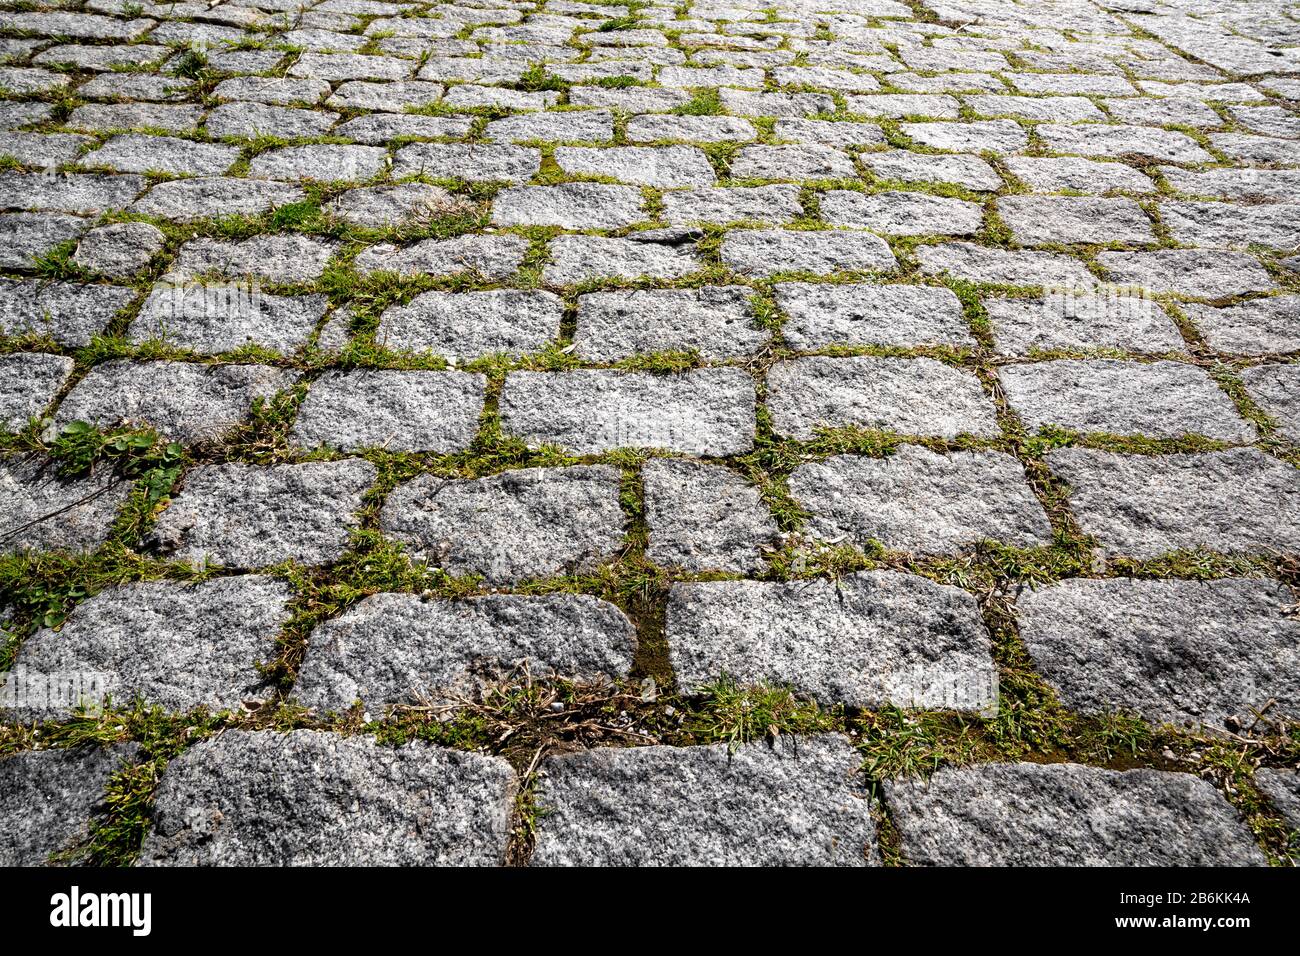 Gray cobble stone walkway or square. Pavement texture Stock Photo